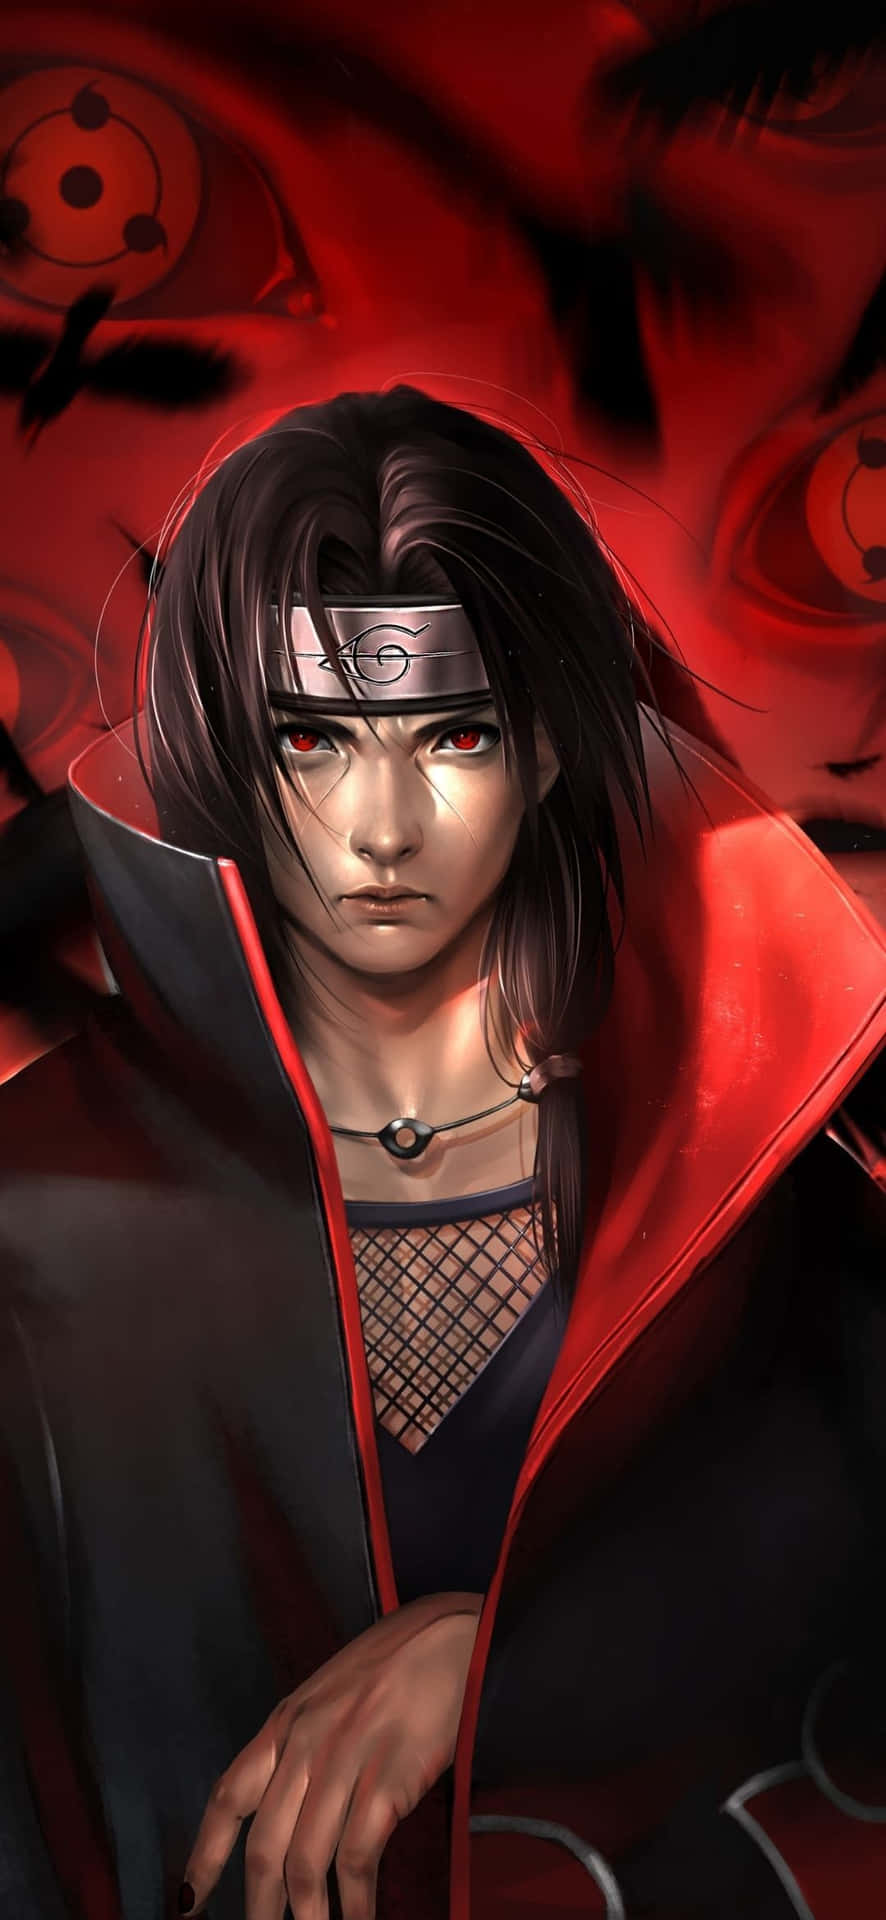 Download Painted Anime Itachi Live Wallpaper 